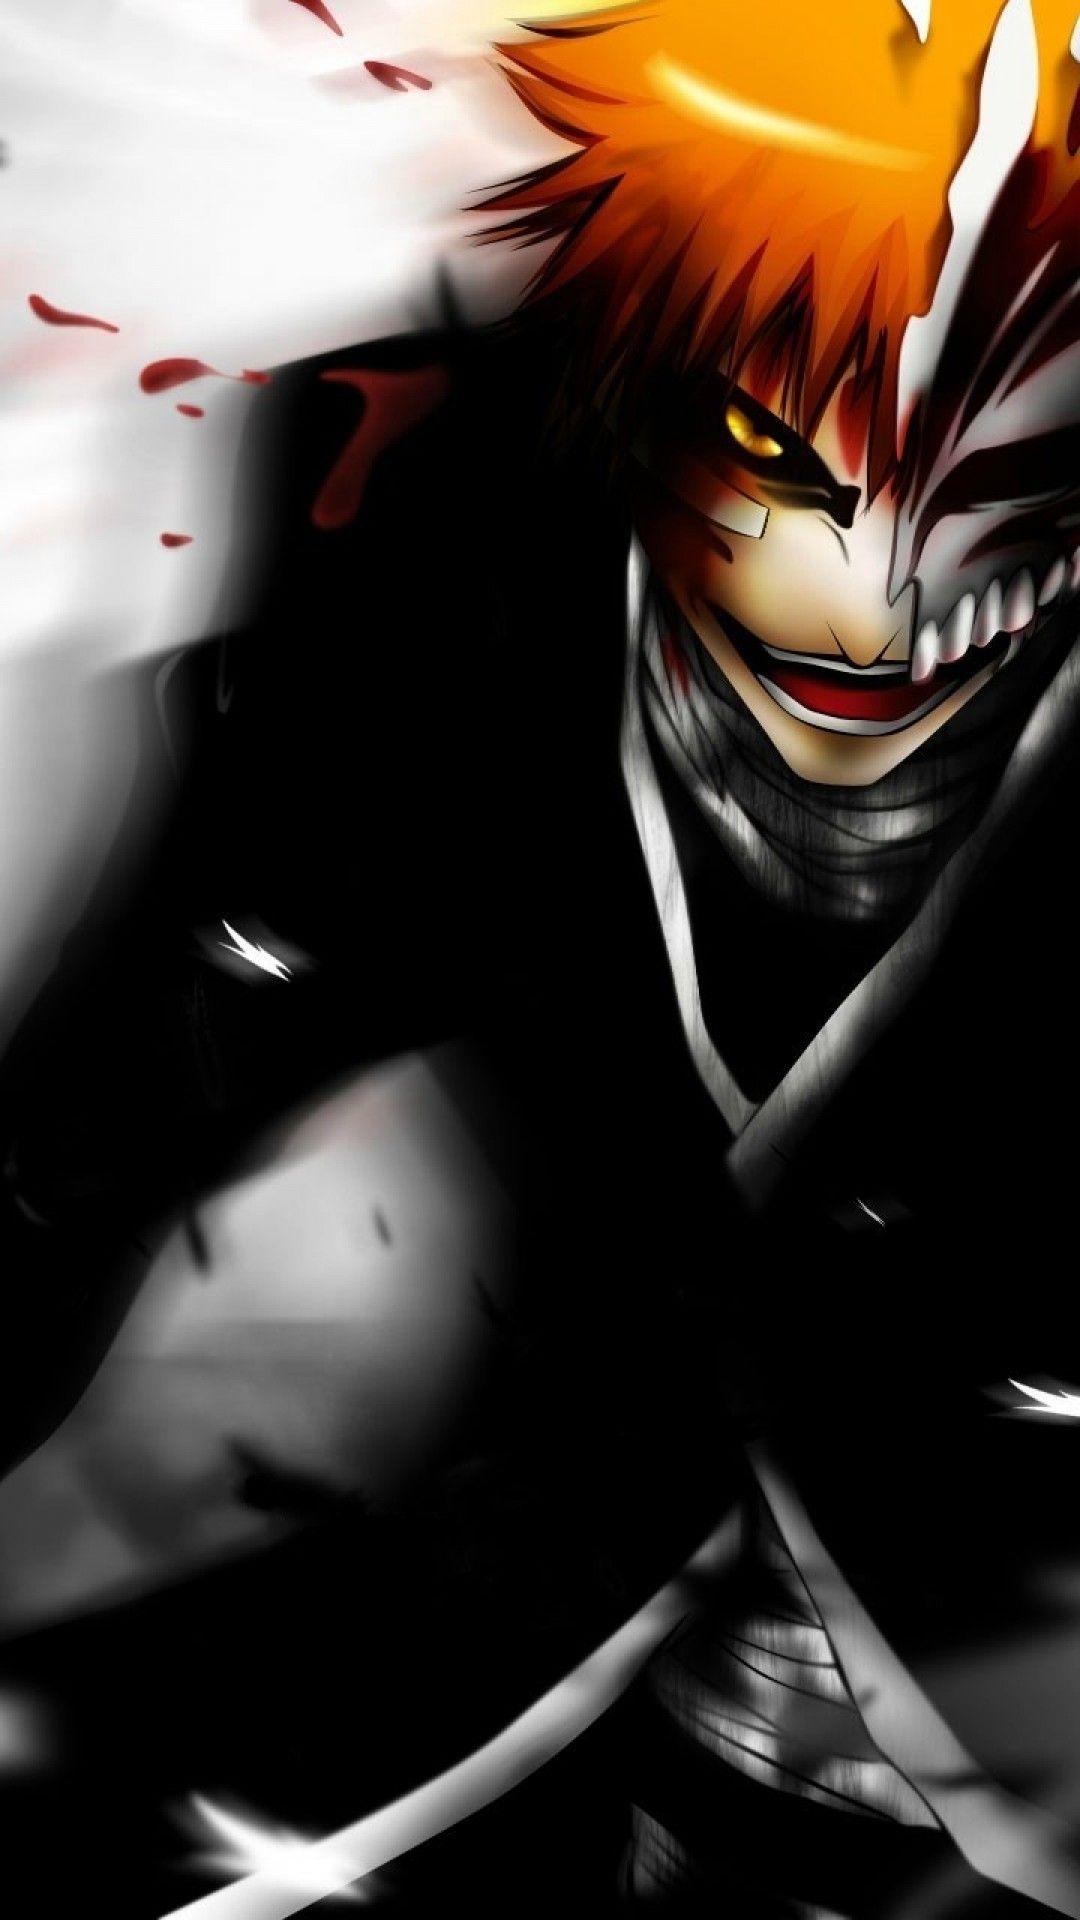 ichigo wallpaper i made for iphone 11 iphone xr PM me if you want me to  make one for you for any other type of phone  rbleach